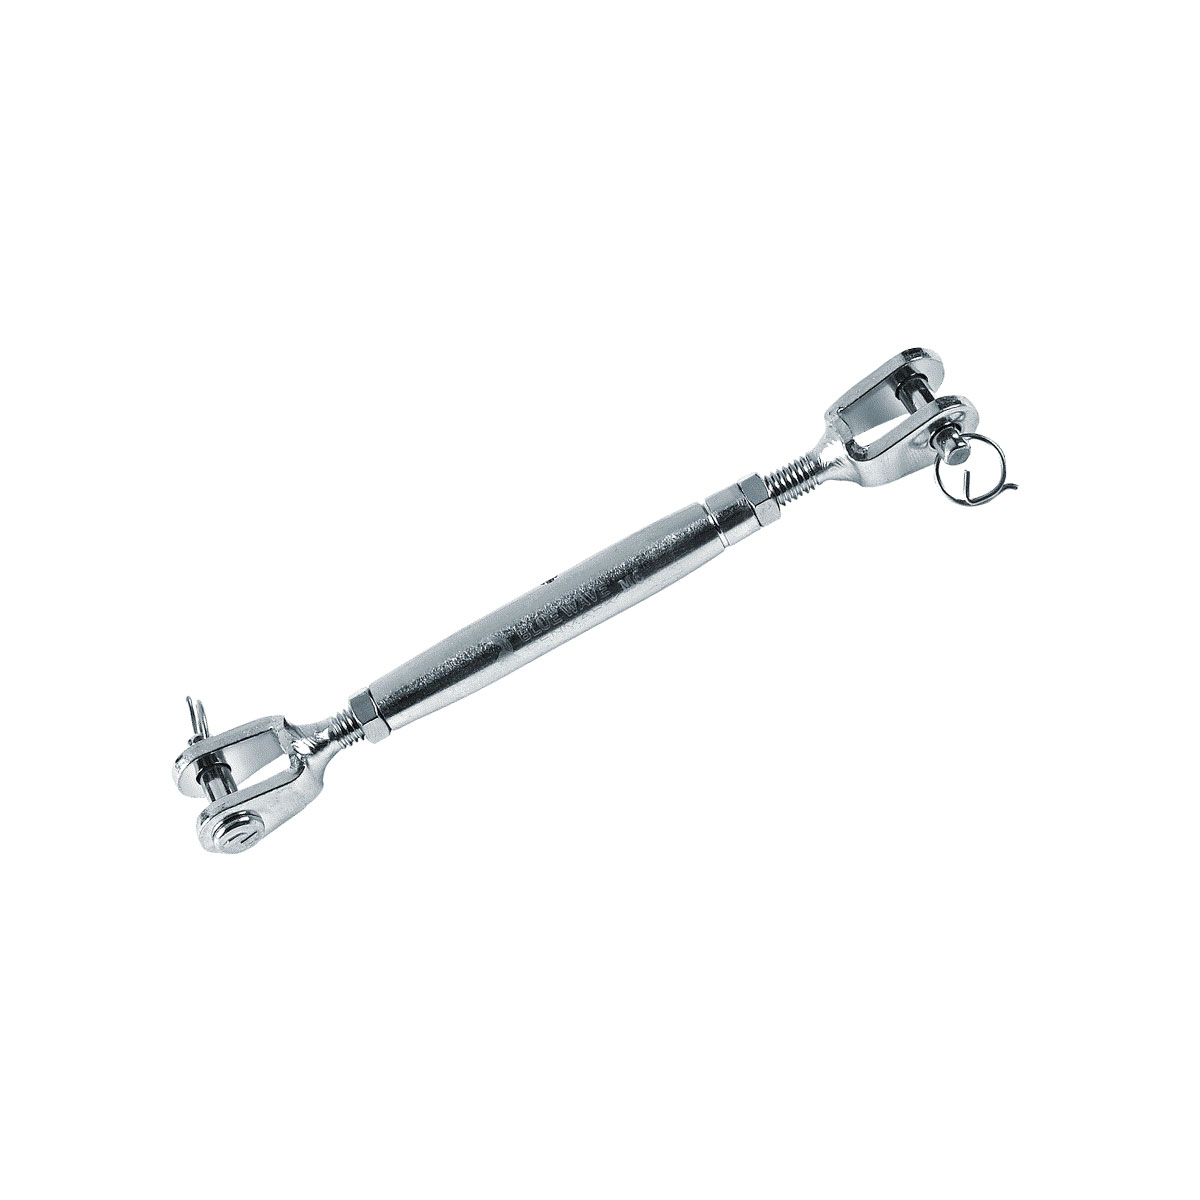 A1212xxxx small rigging screw fork/fork